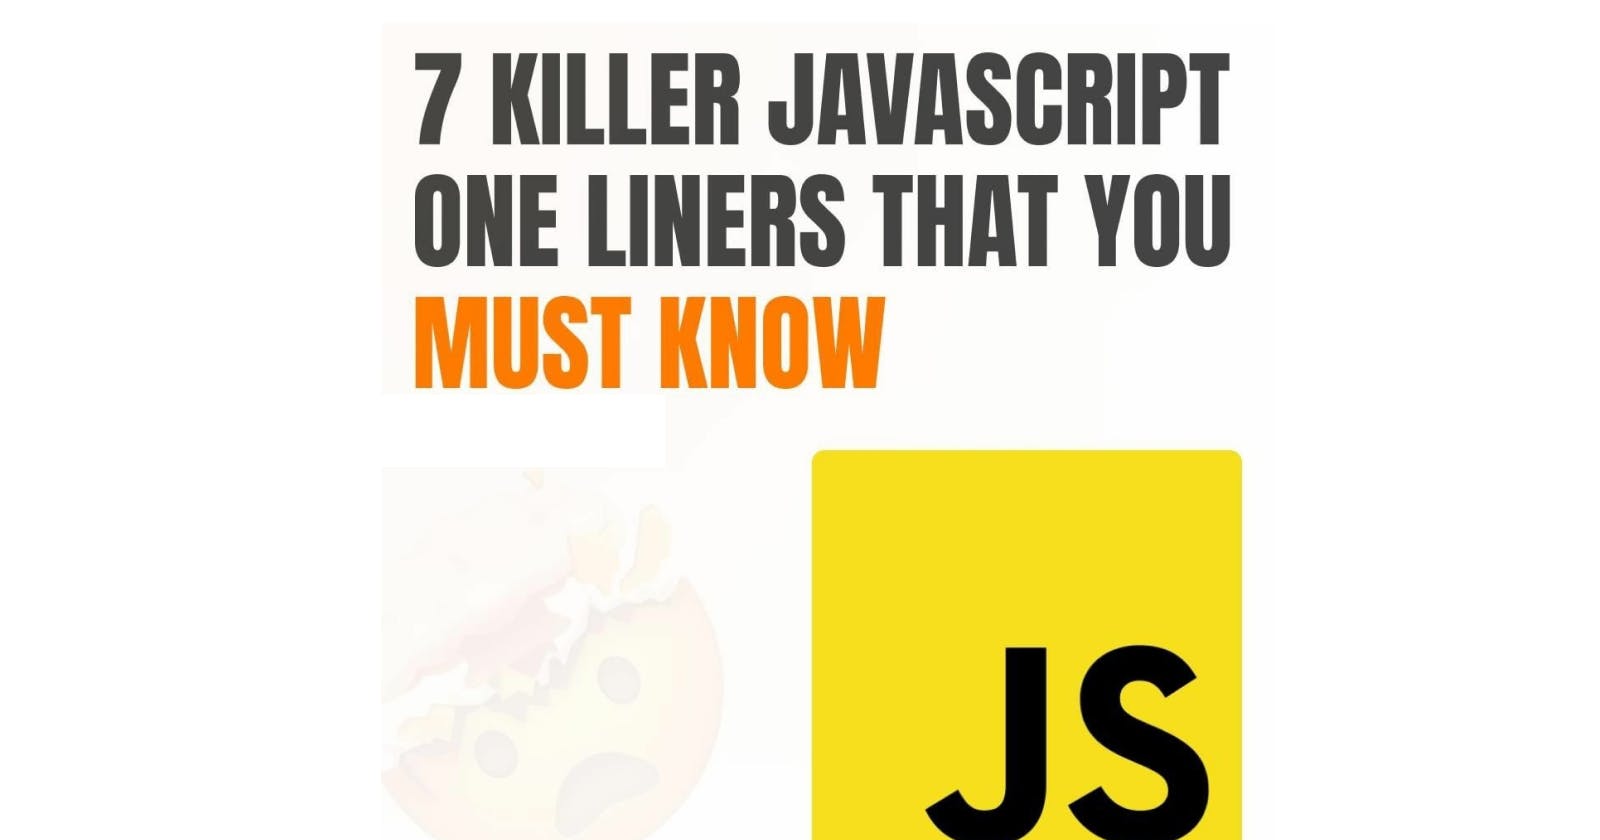 7 Killer JavaScript One-Liners that you must know